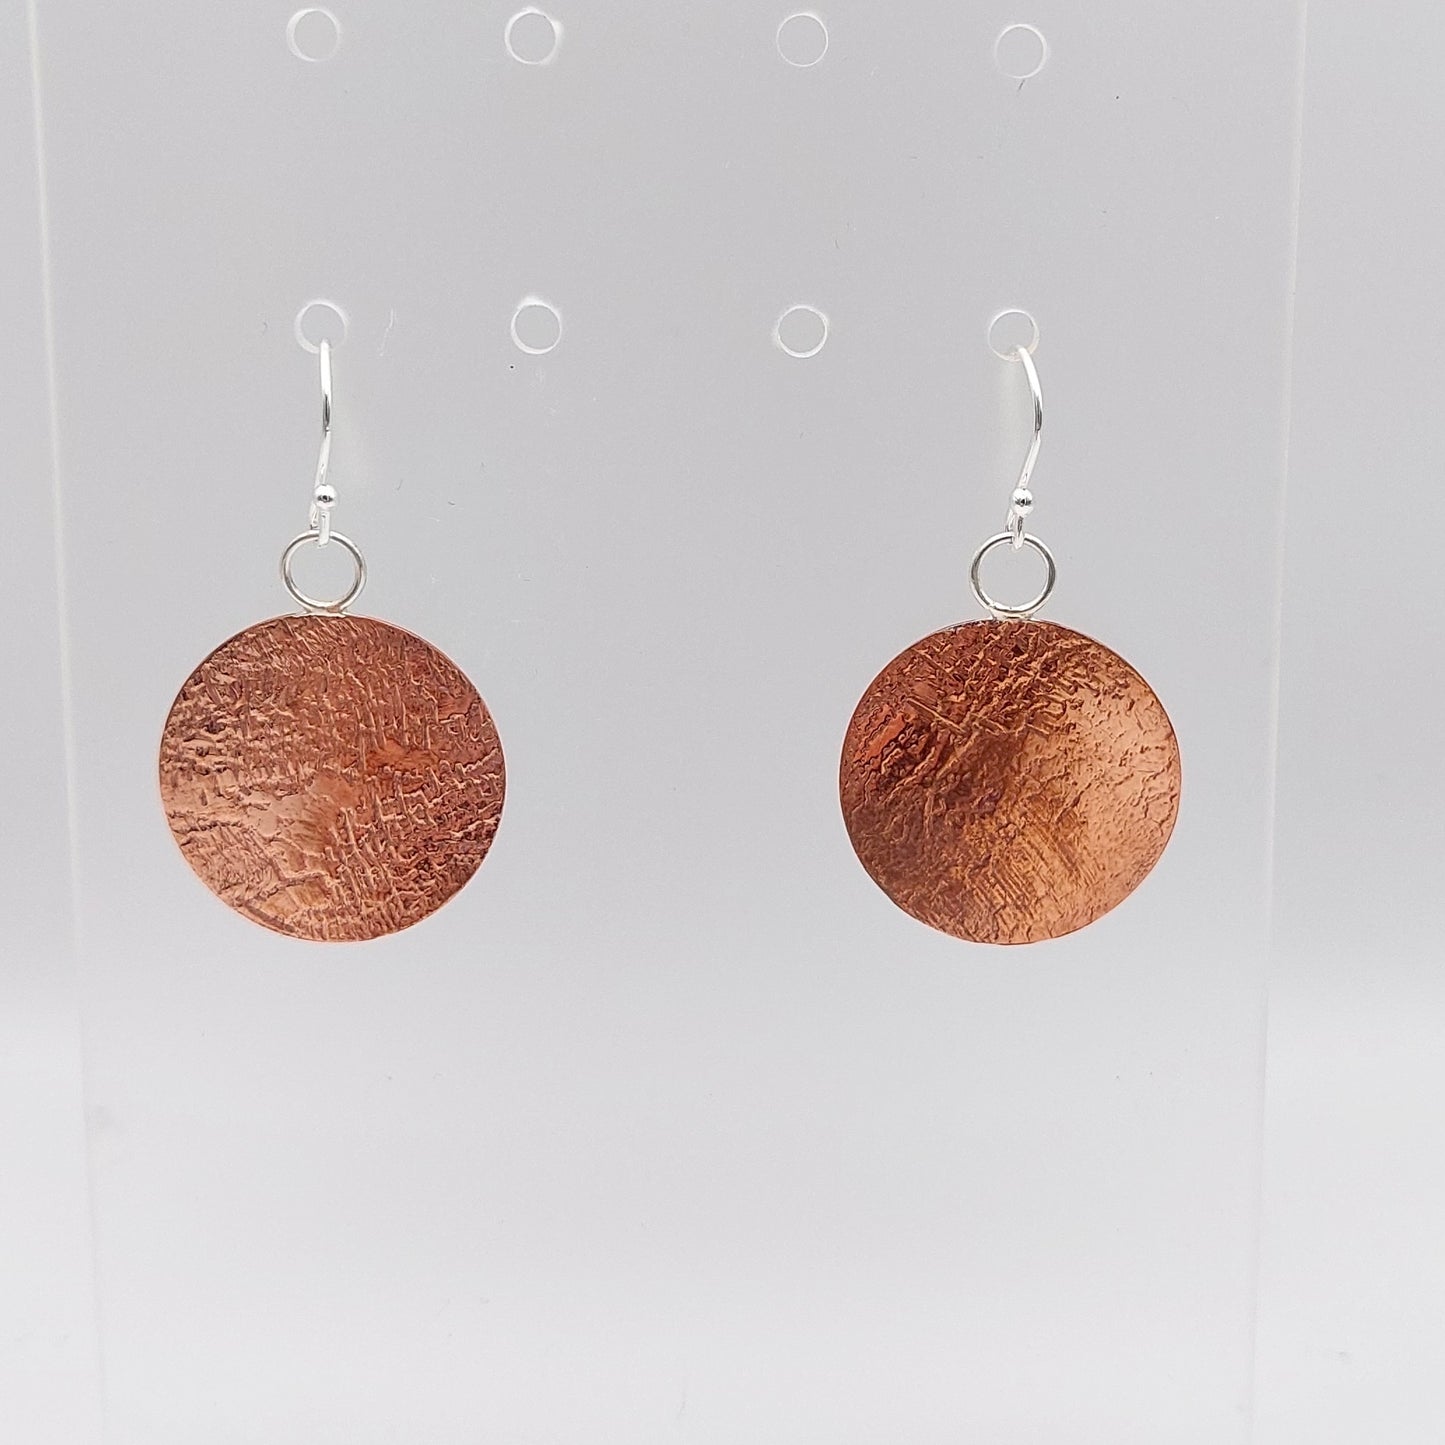 Abstractly Textured Copper Earrings